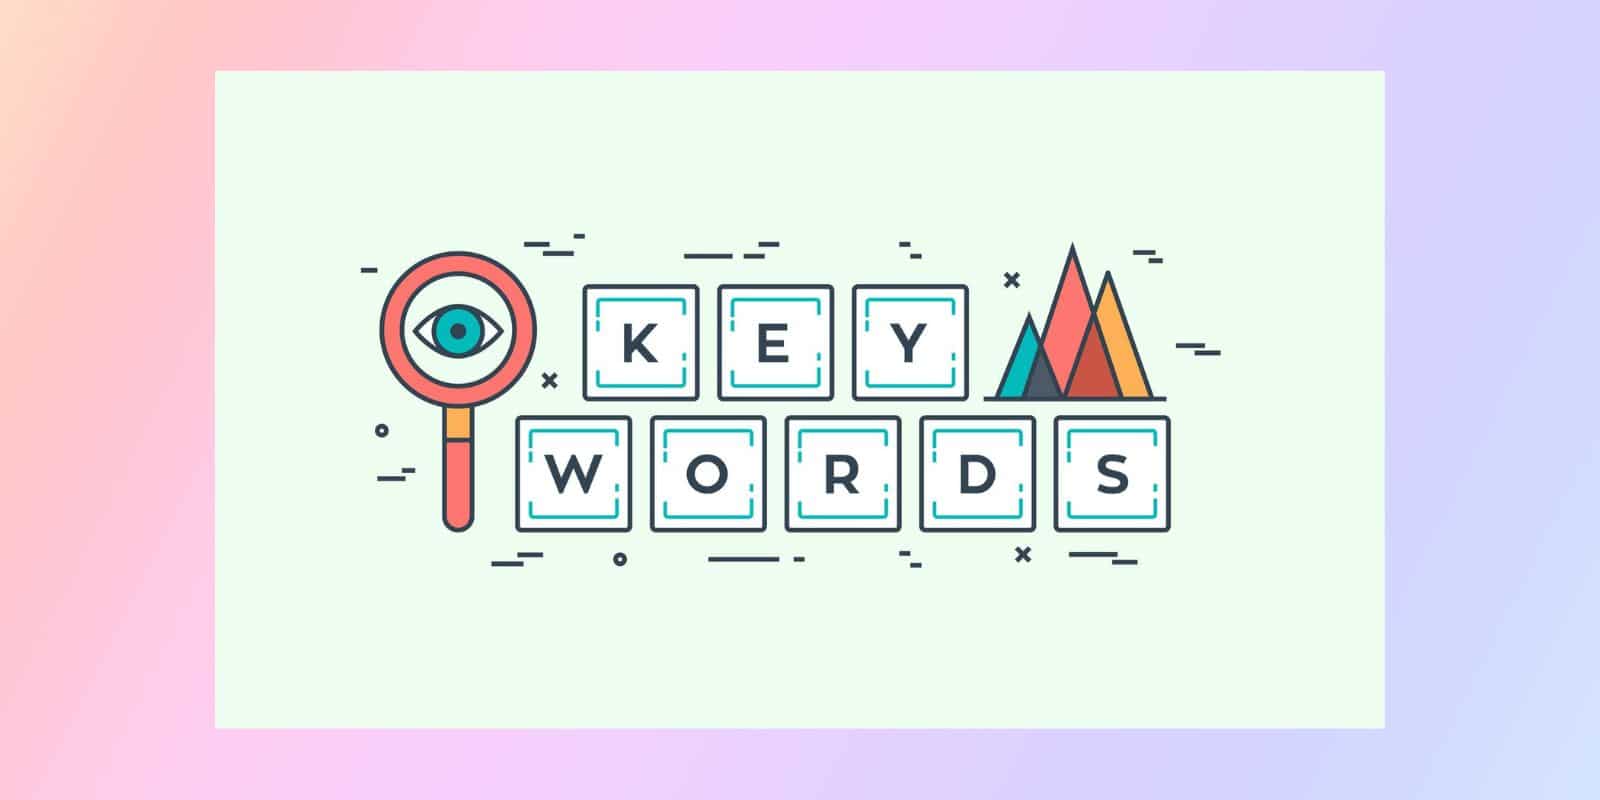 Add the right keywords